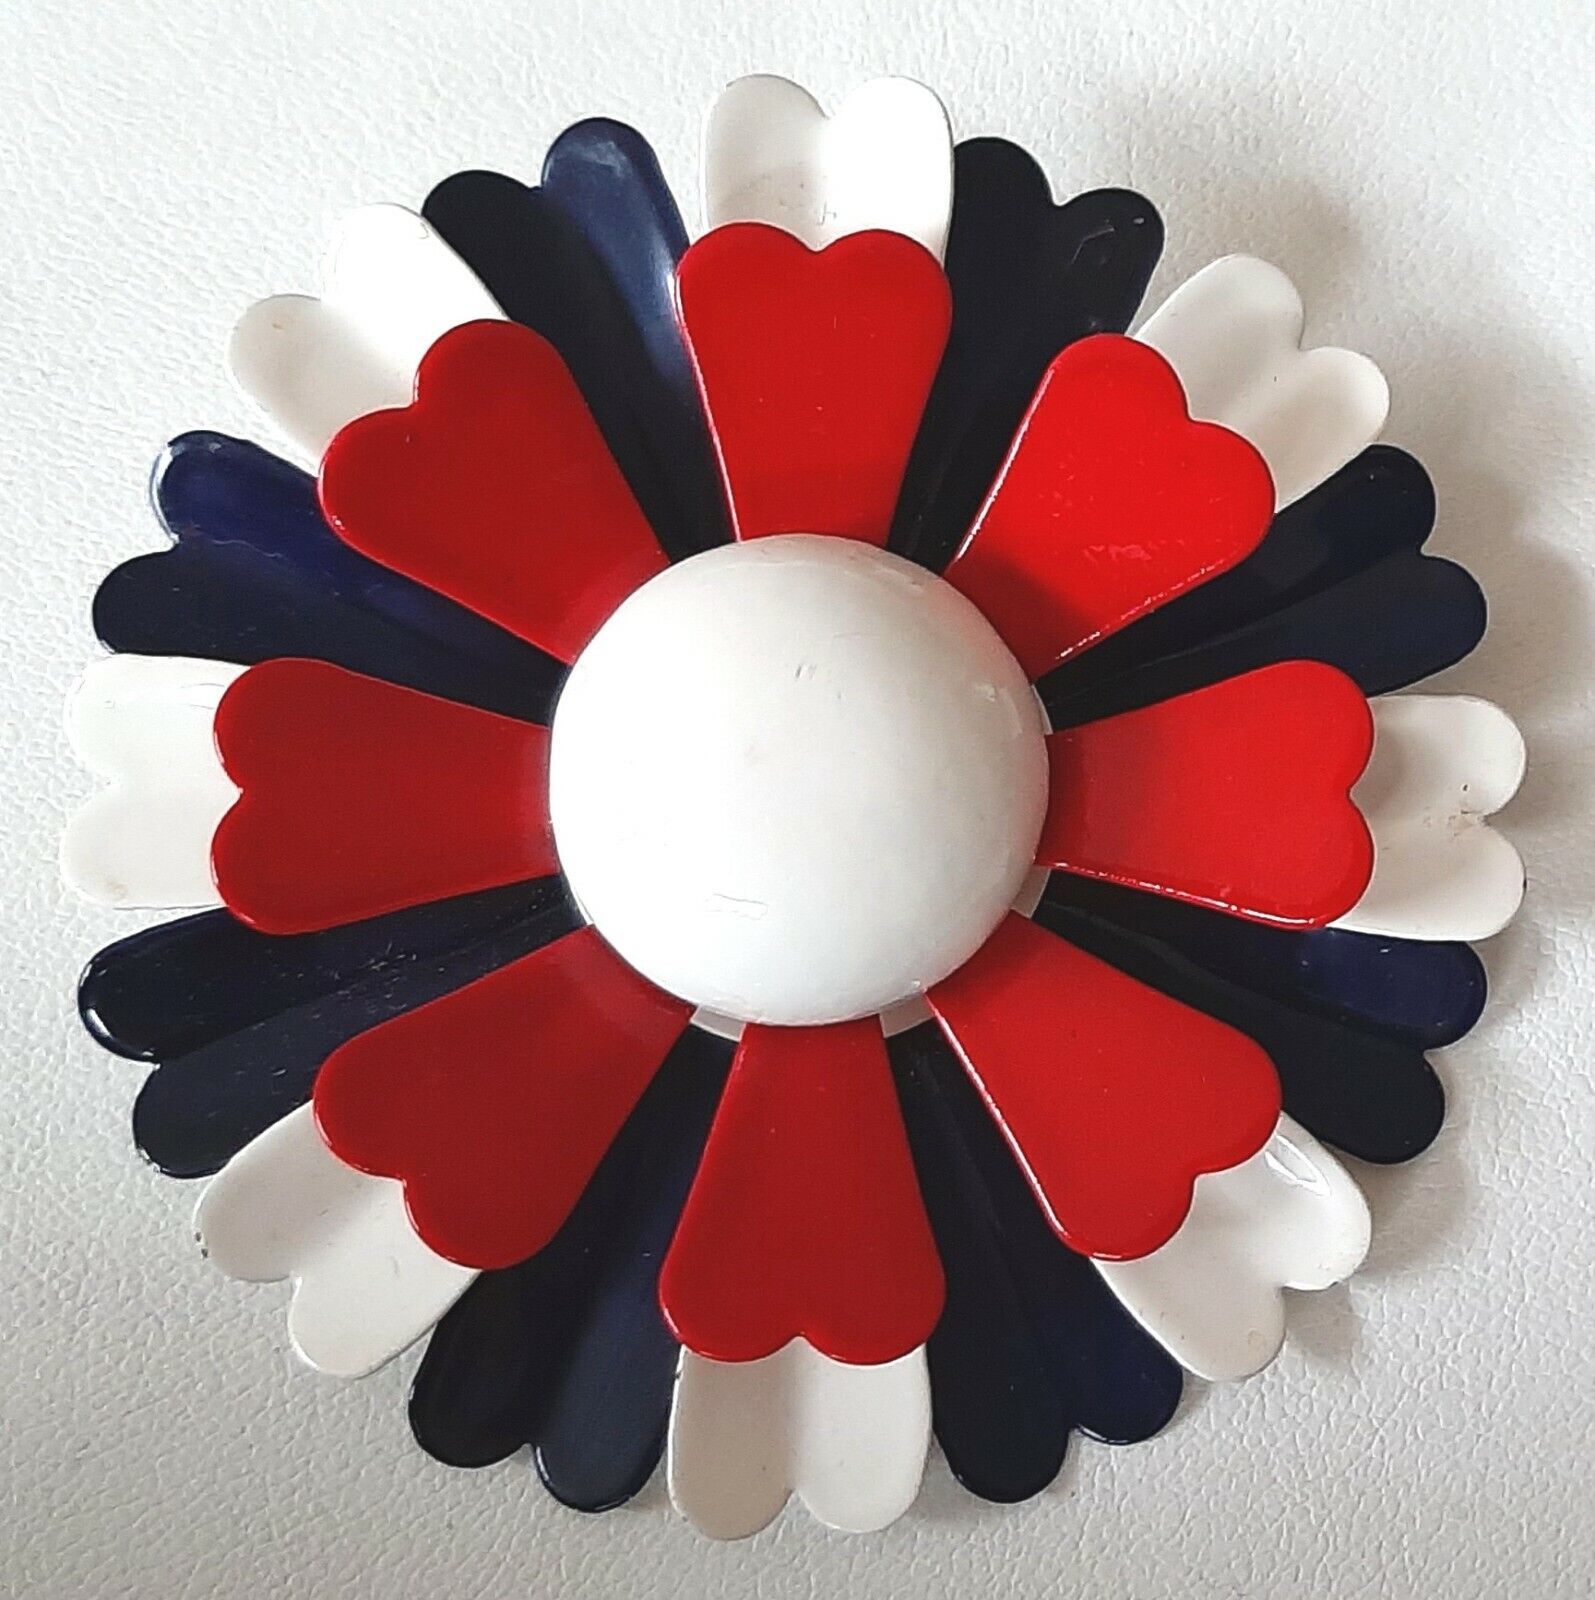 Primary image for FLOWER POWER Brooch Pin Patriotic Metal Enamel Red White and Blue 1960s